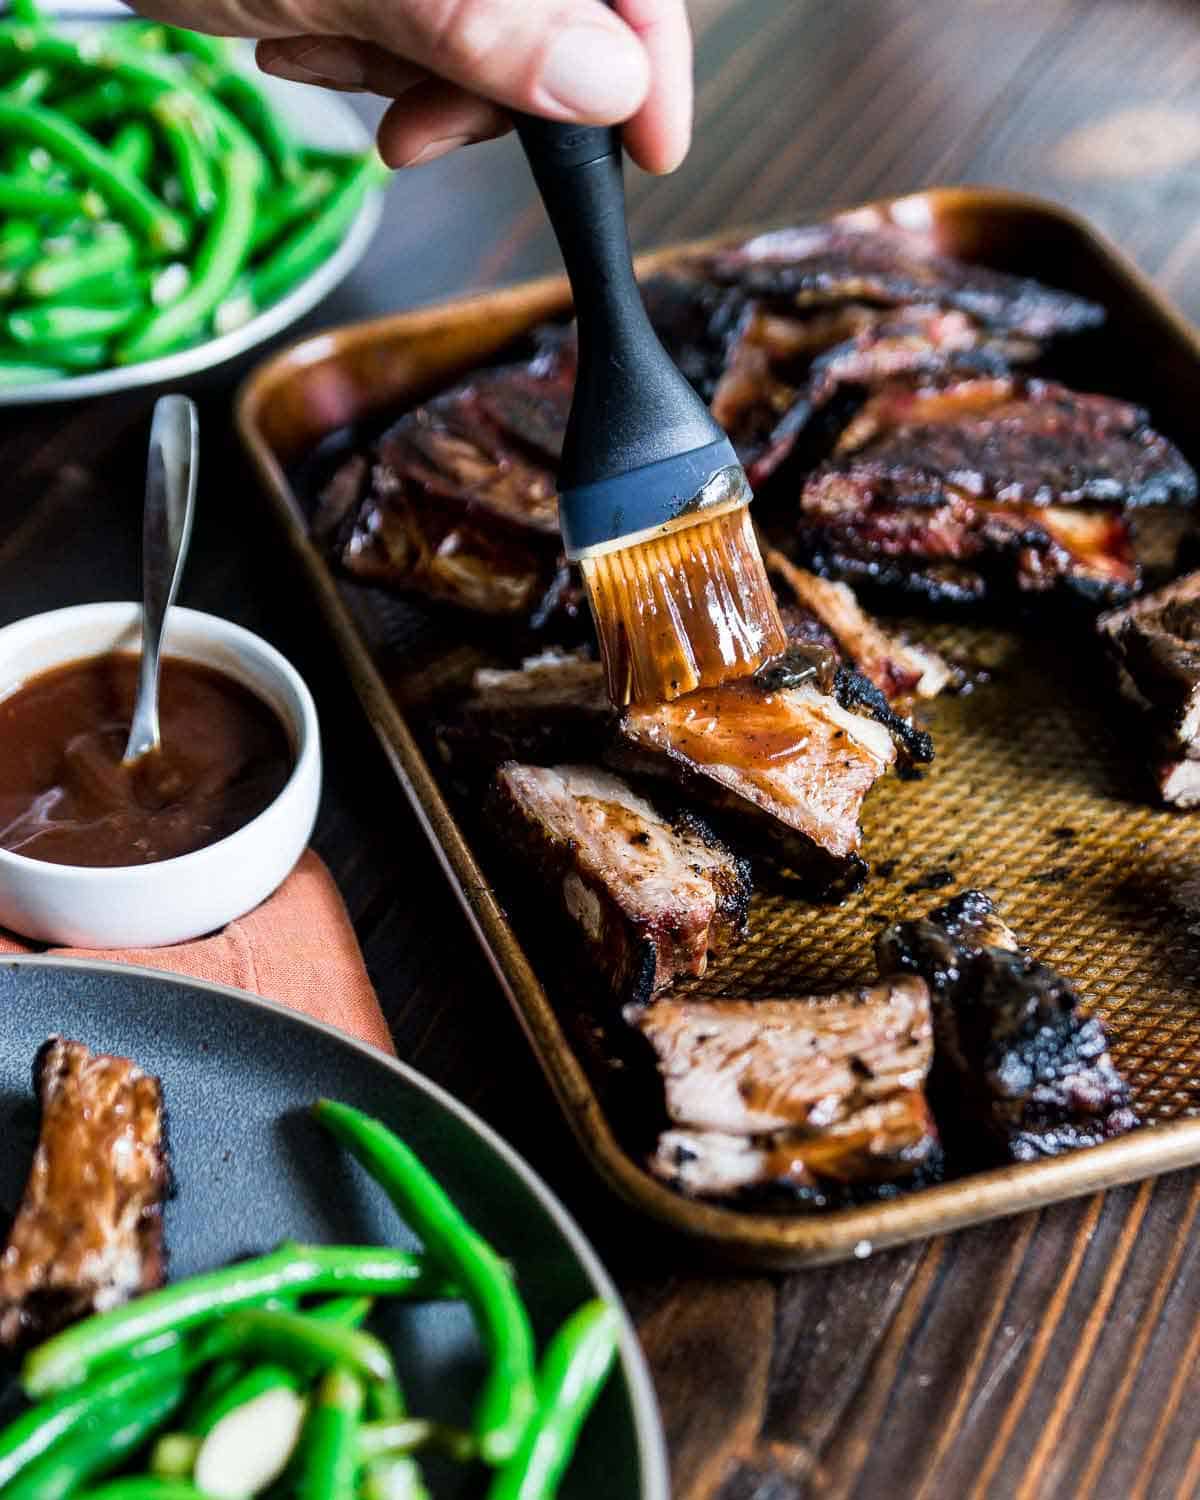 BBQ lamb ribs are an easy grilled recipe perfect for summer.